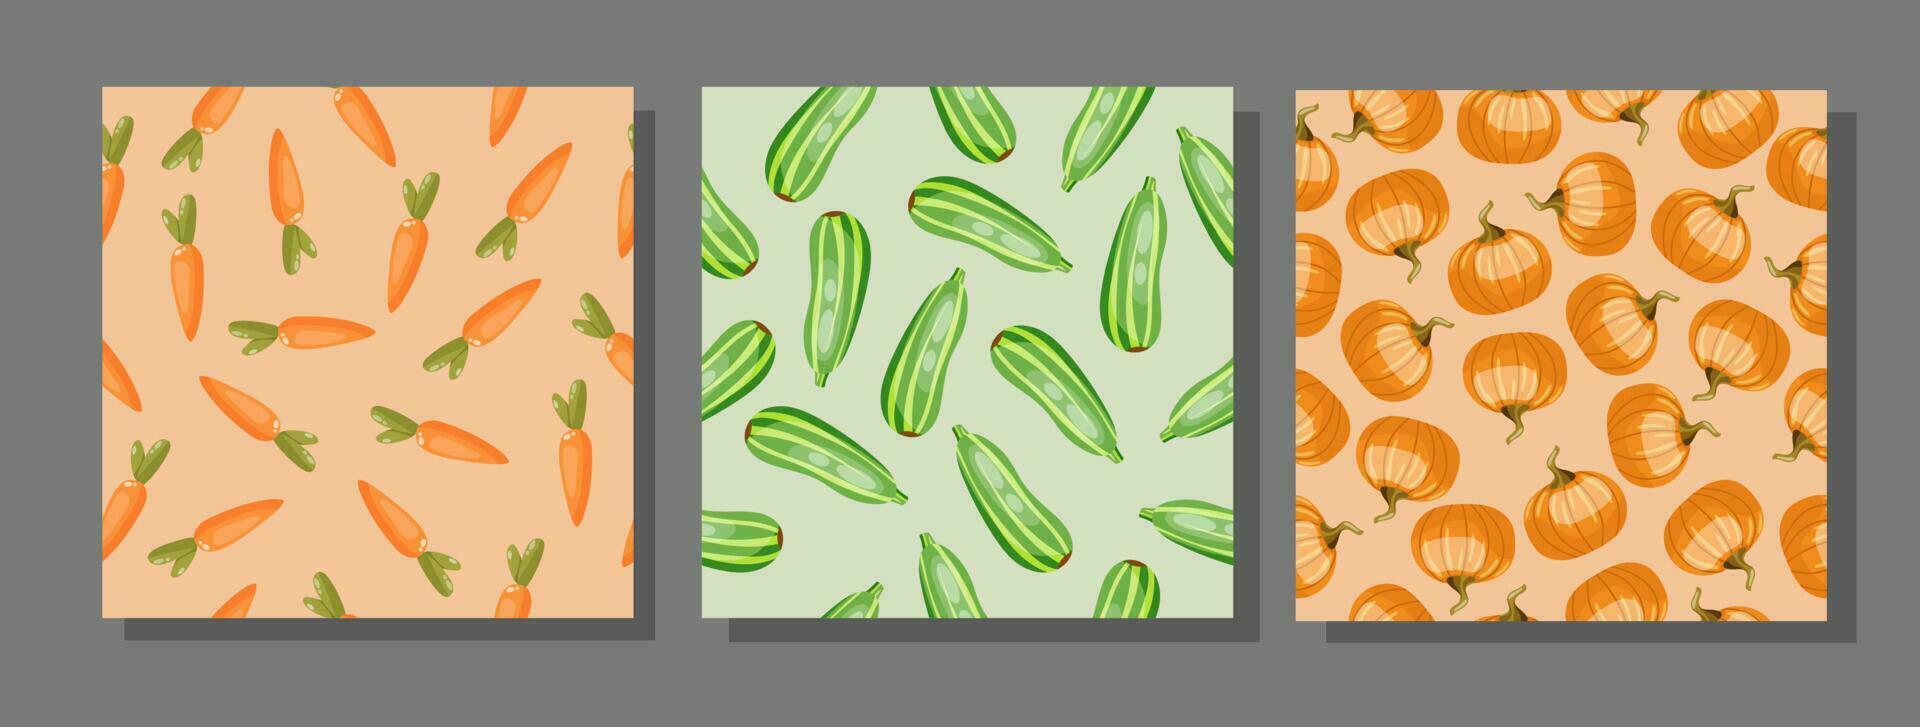 Set of seamless handdrawn patterns with carrots, pumpkin, zucchini vegetables. Colourful vector design.